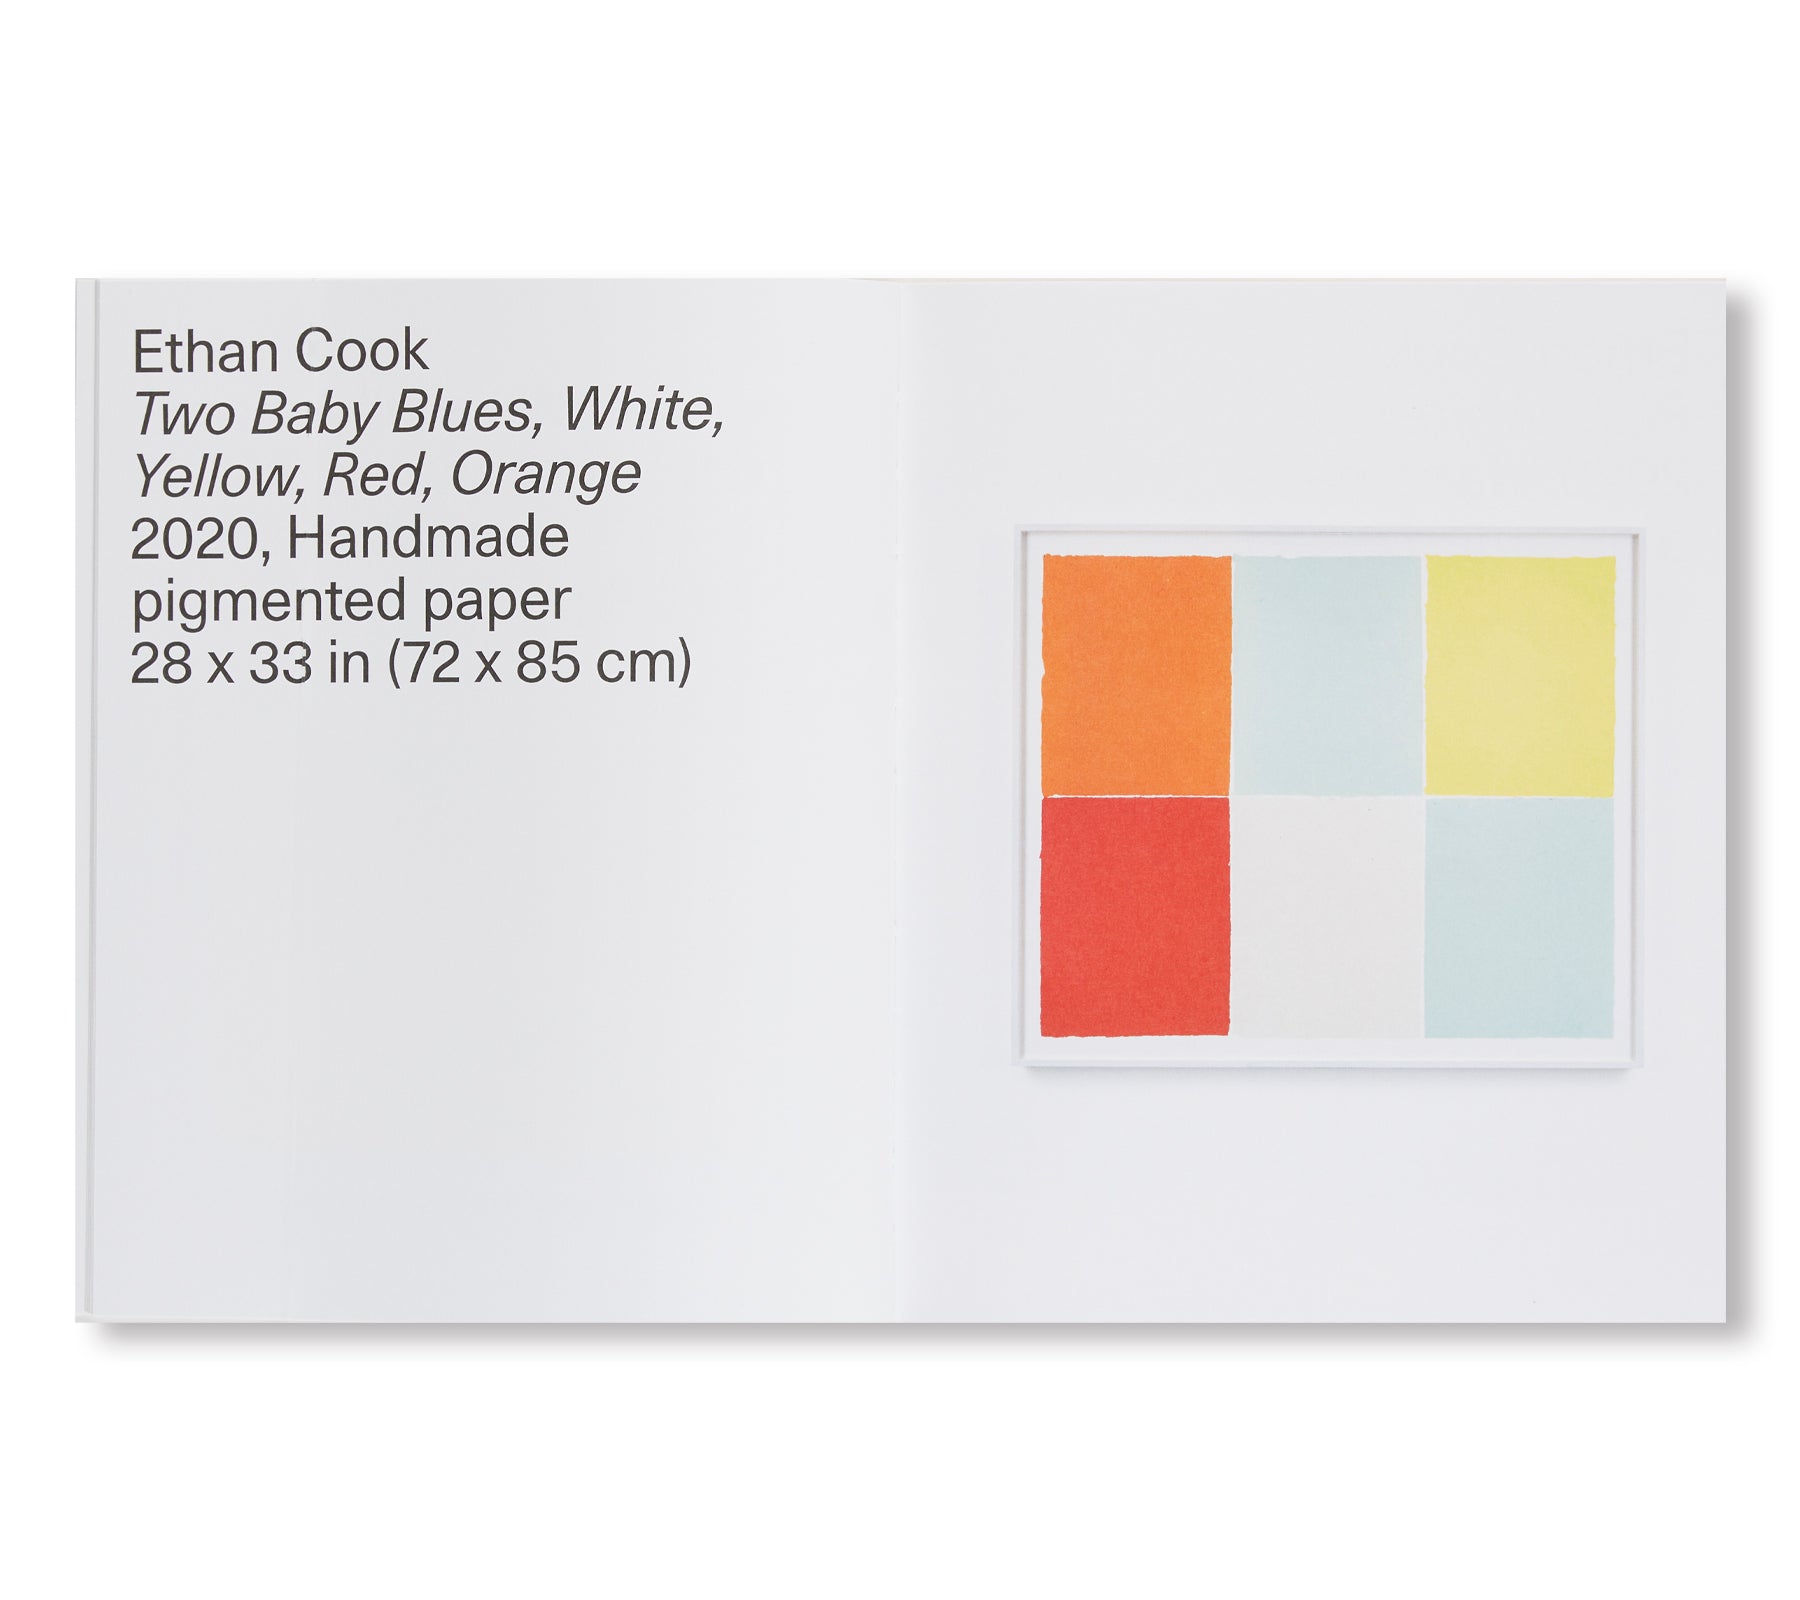 A RAINBOW IN CURVED AIR by Ethan Cook